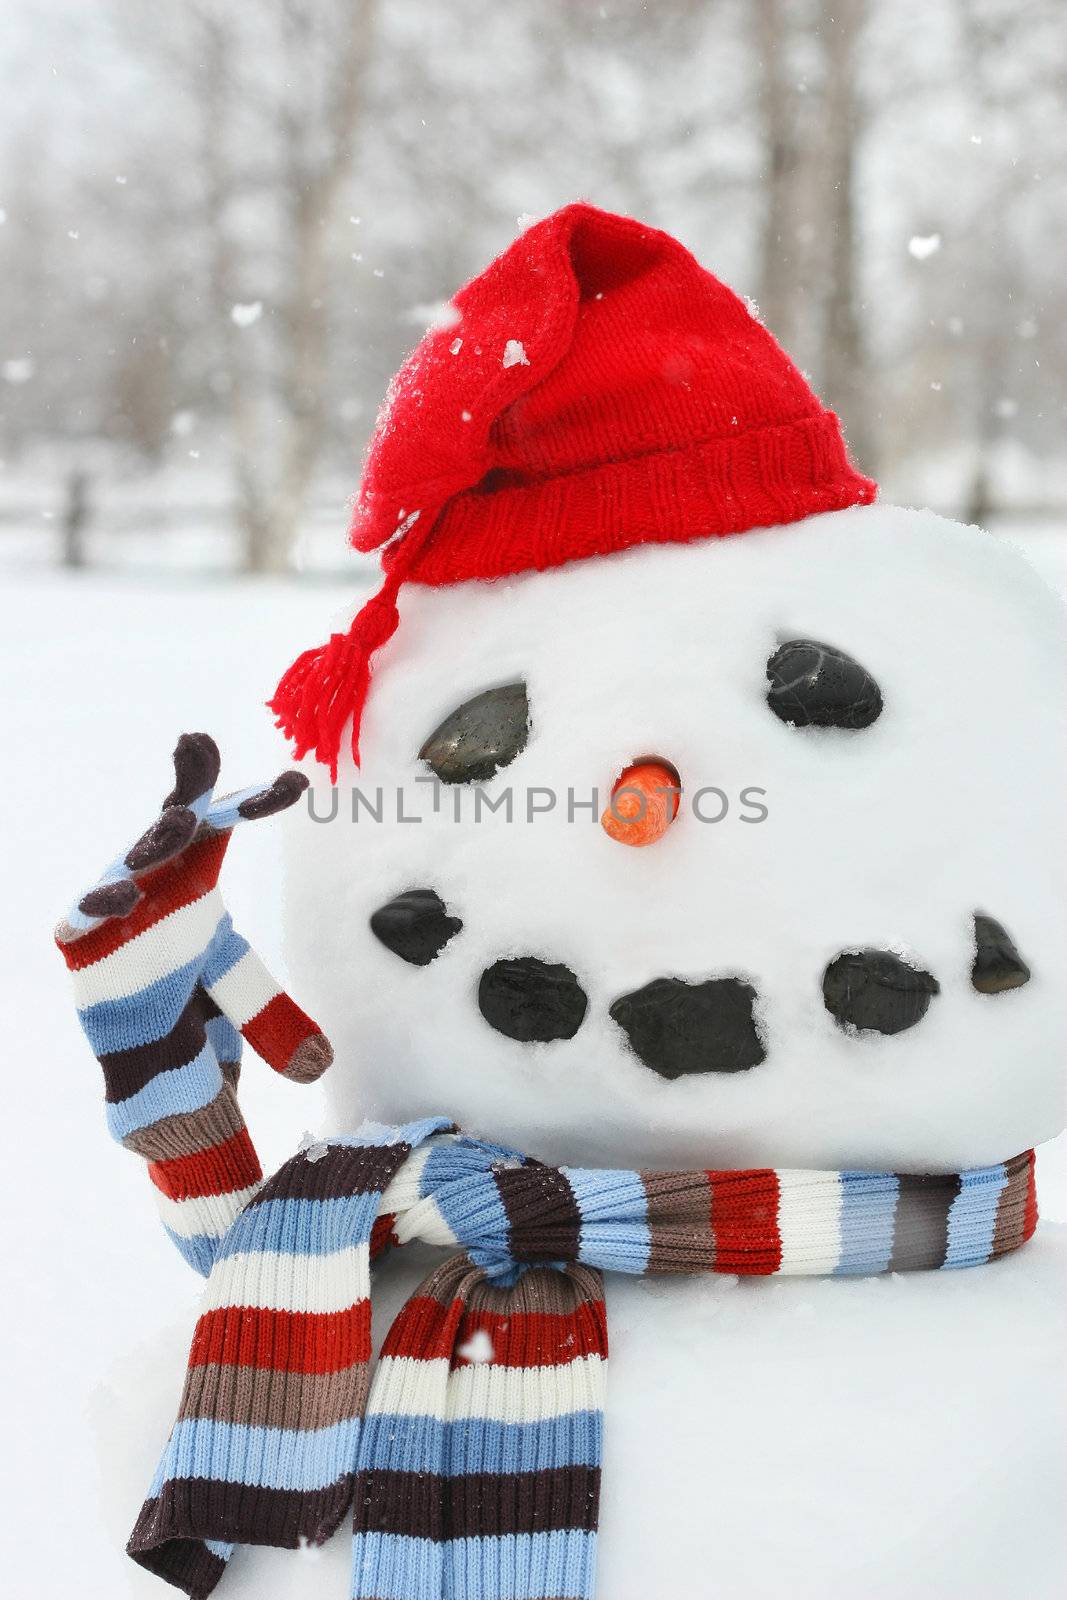 Building a snowman with red hat on a cold wintery day